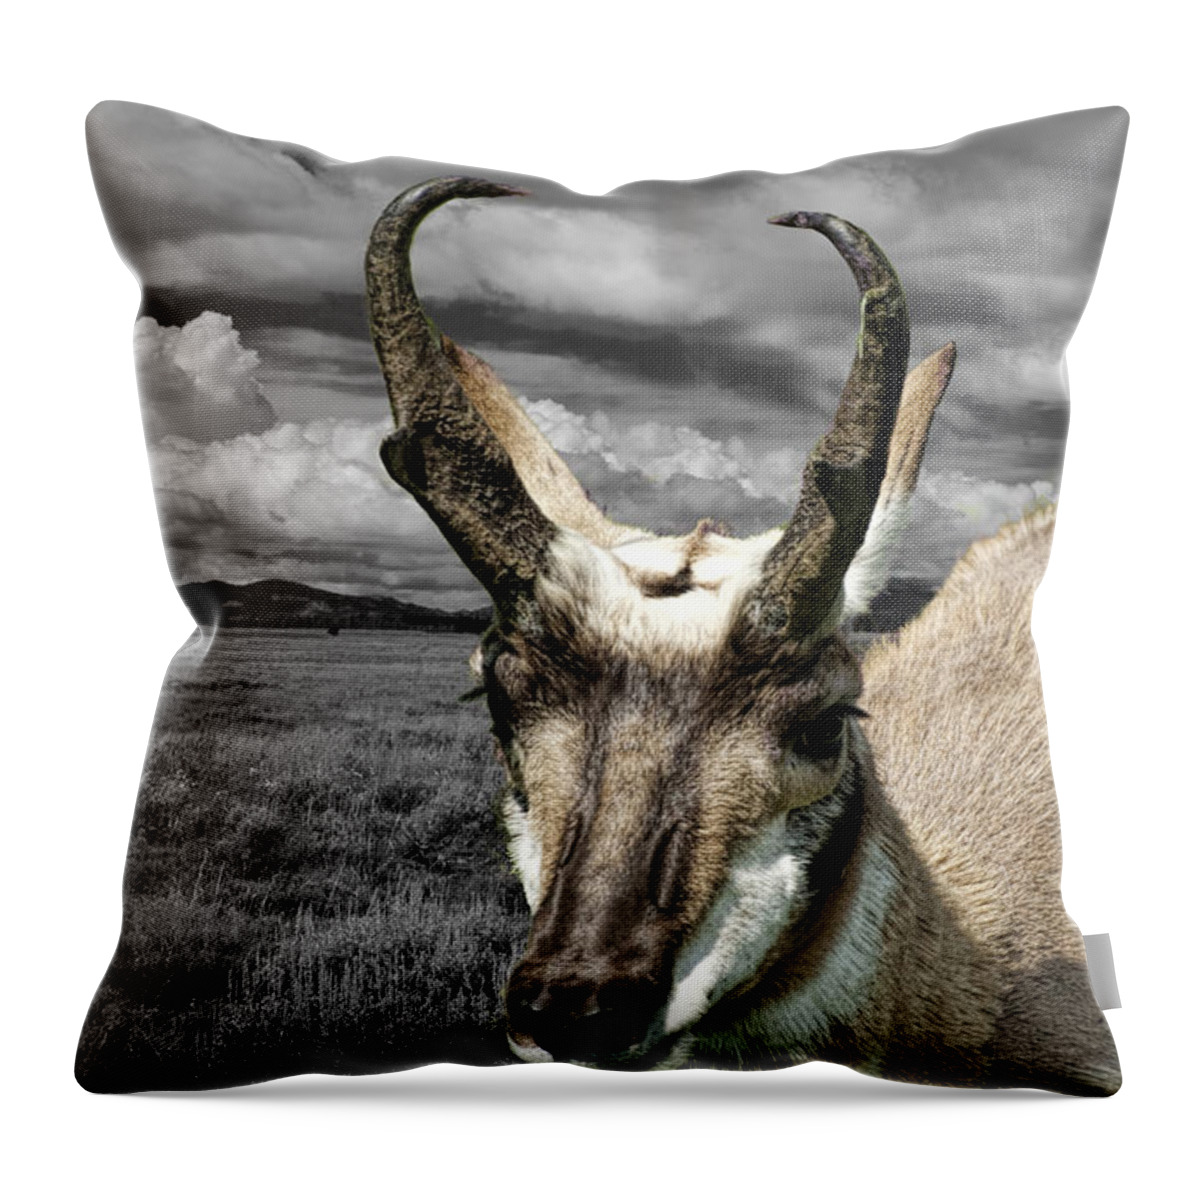 Antelope Throw Pillow featuring the photograph Western Antelope Pronghorn by Randall Nyhof